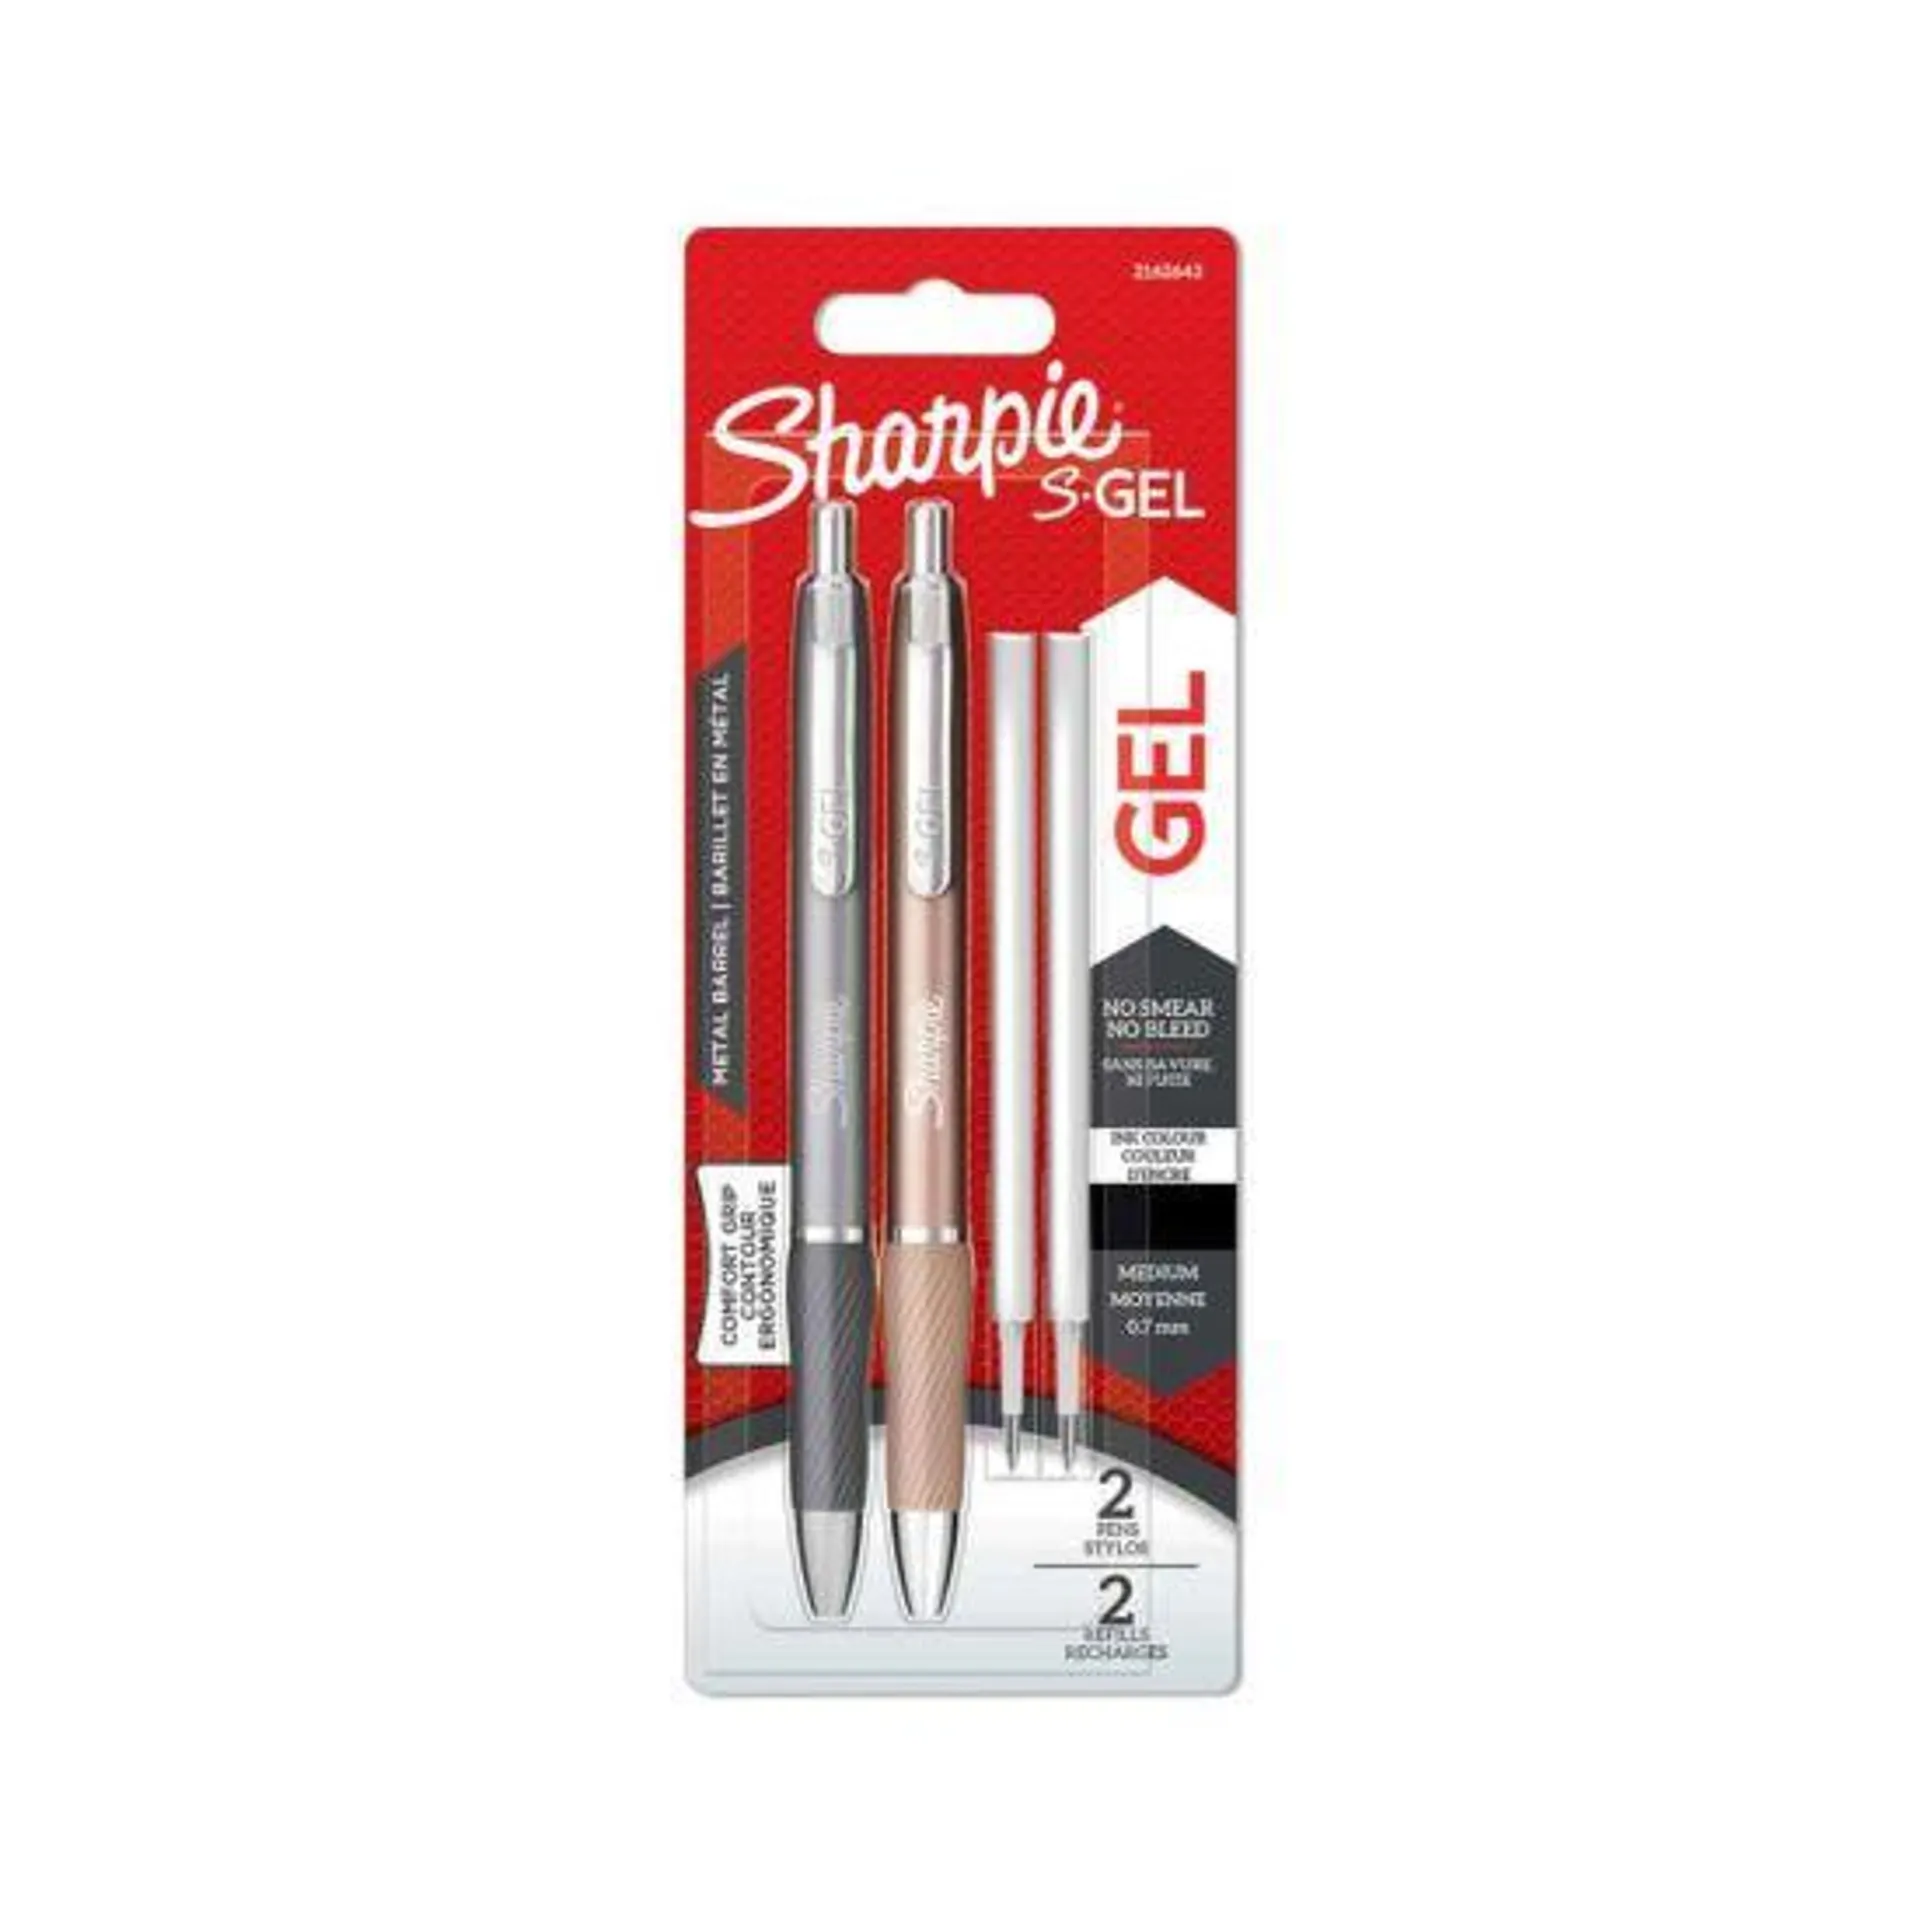 Sharpie S Gel Pack of 2 with Refills